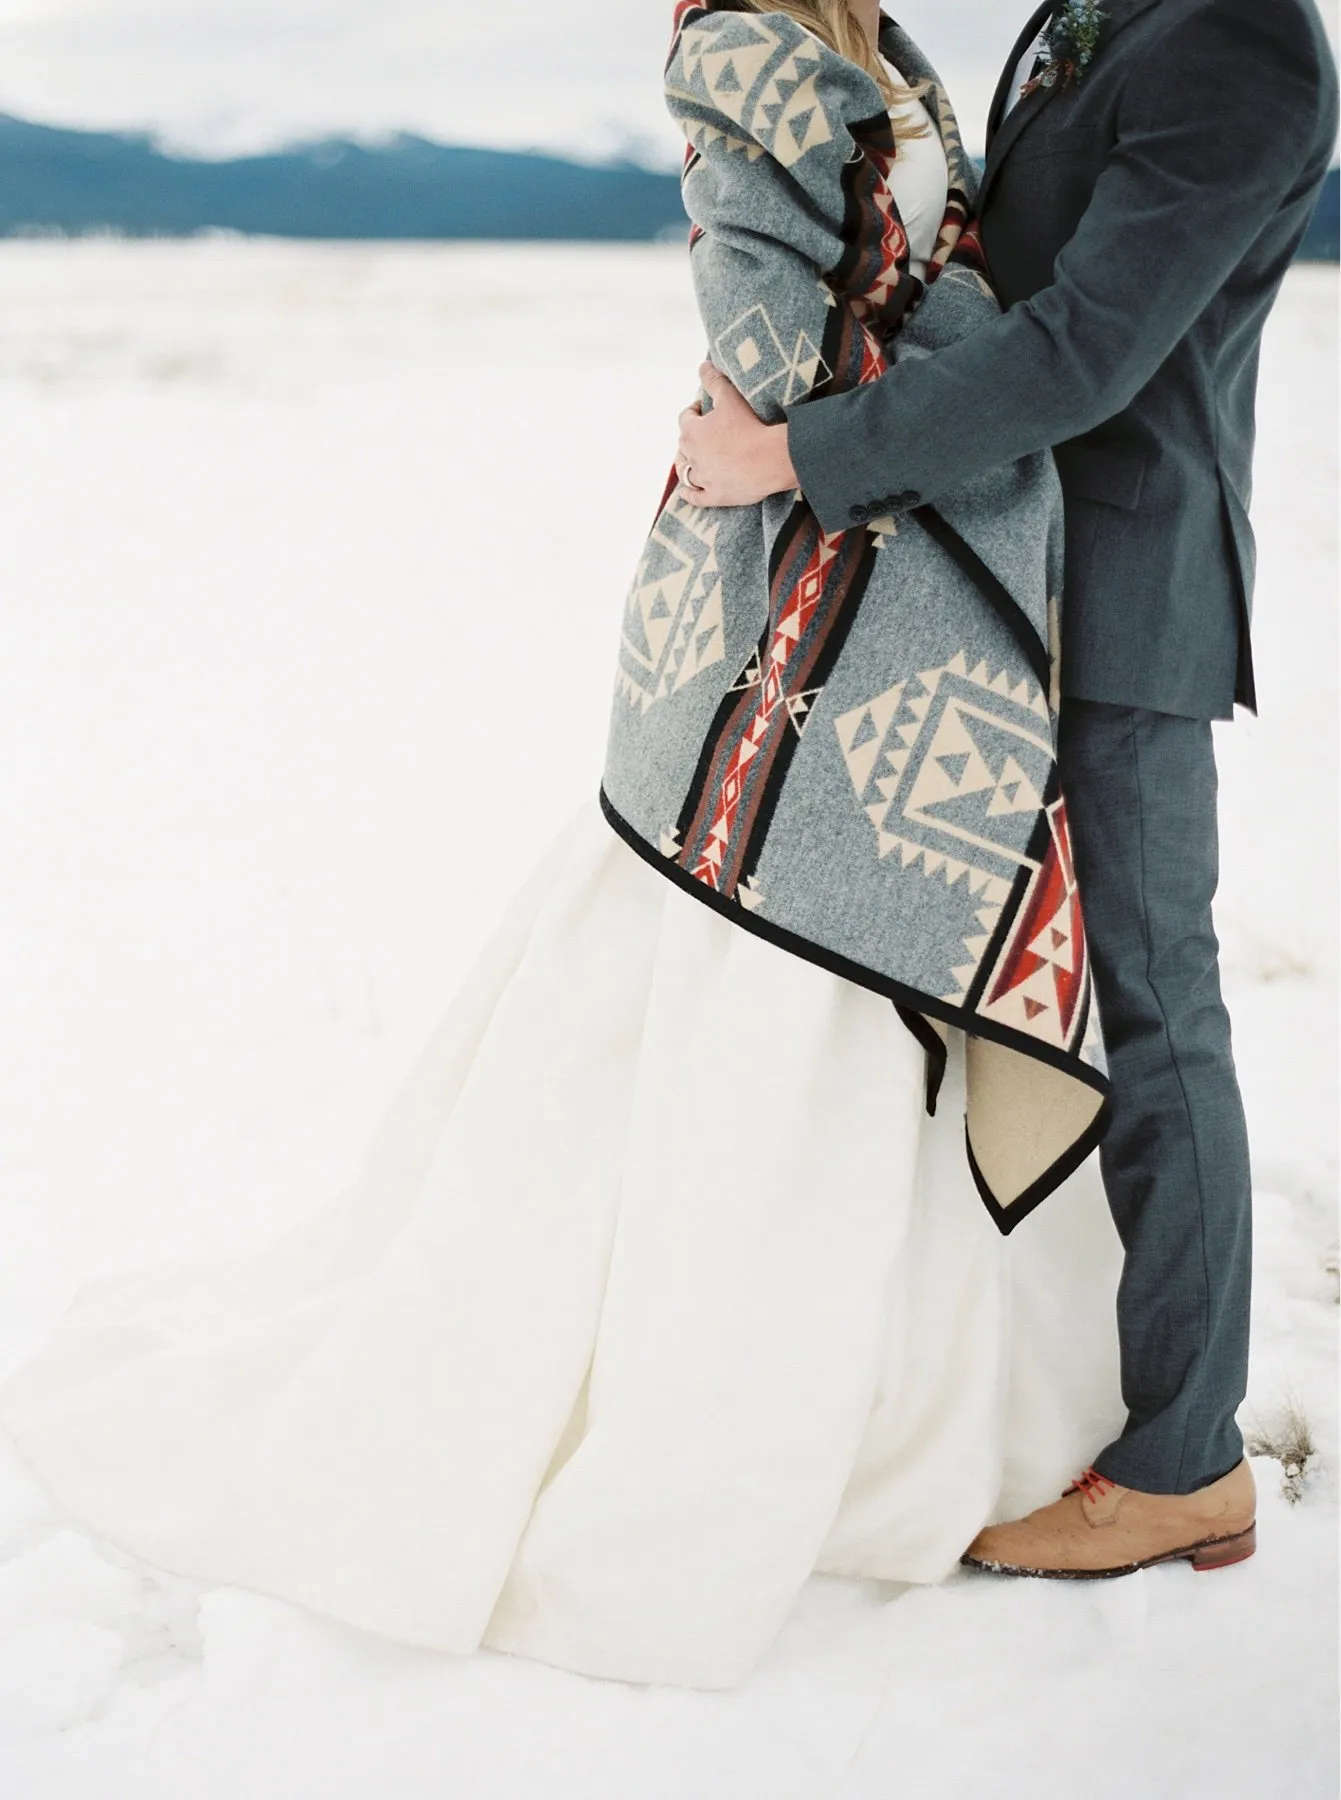 A bride and groom standing in the snow